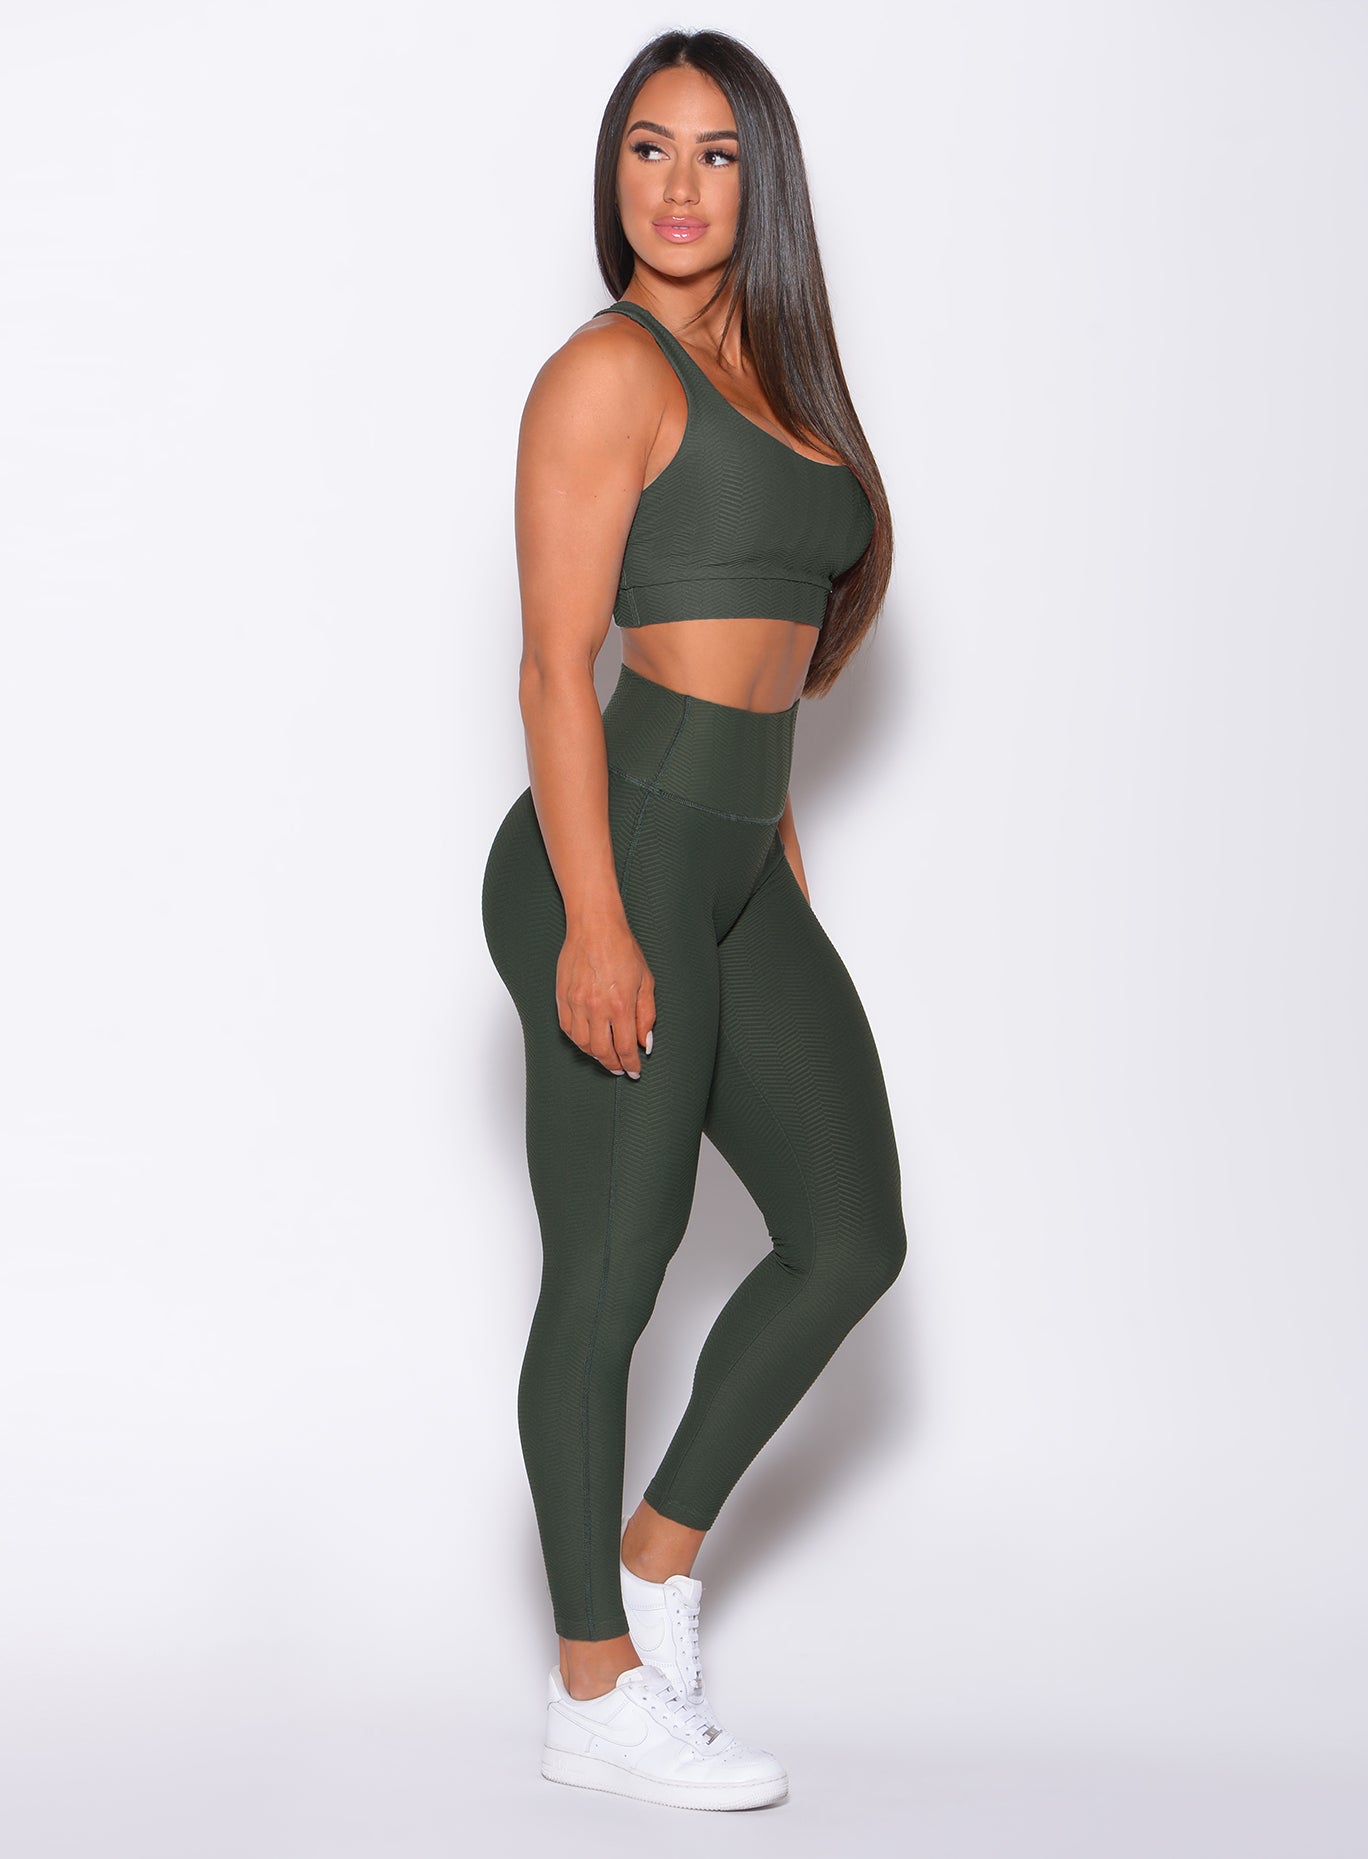 Right side profile view of a model in our Chevron Leggings in lucky green color and matching bra